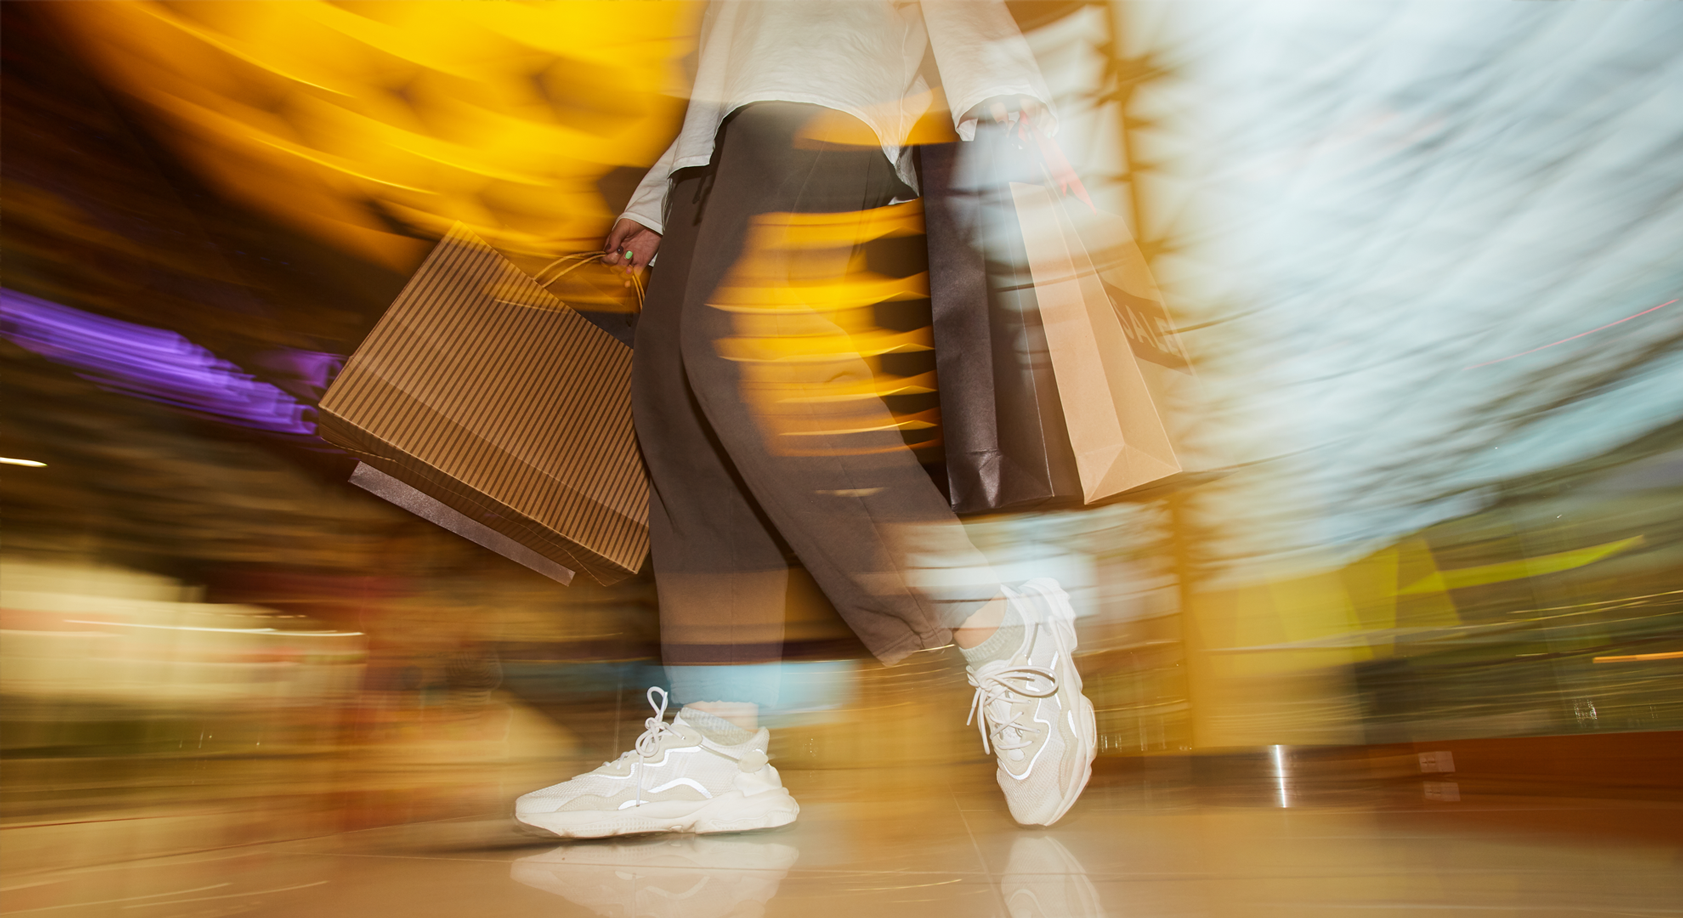 An abstract image showing a person clothes shopping